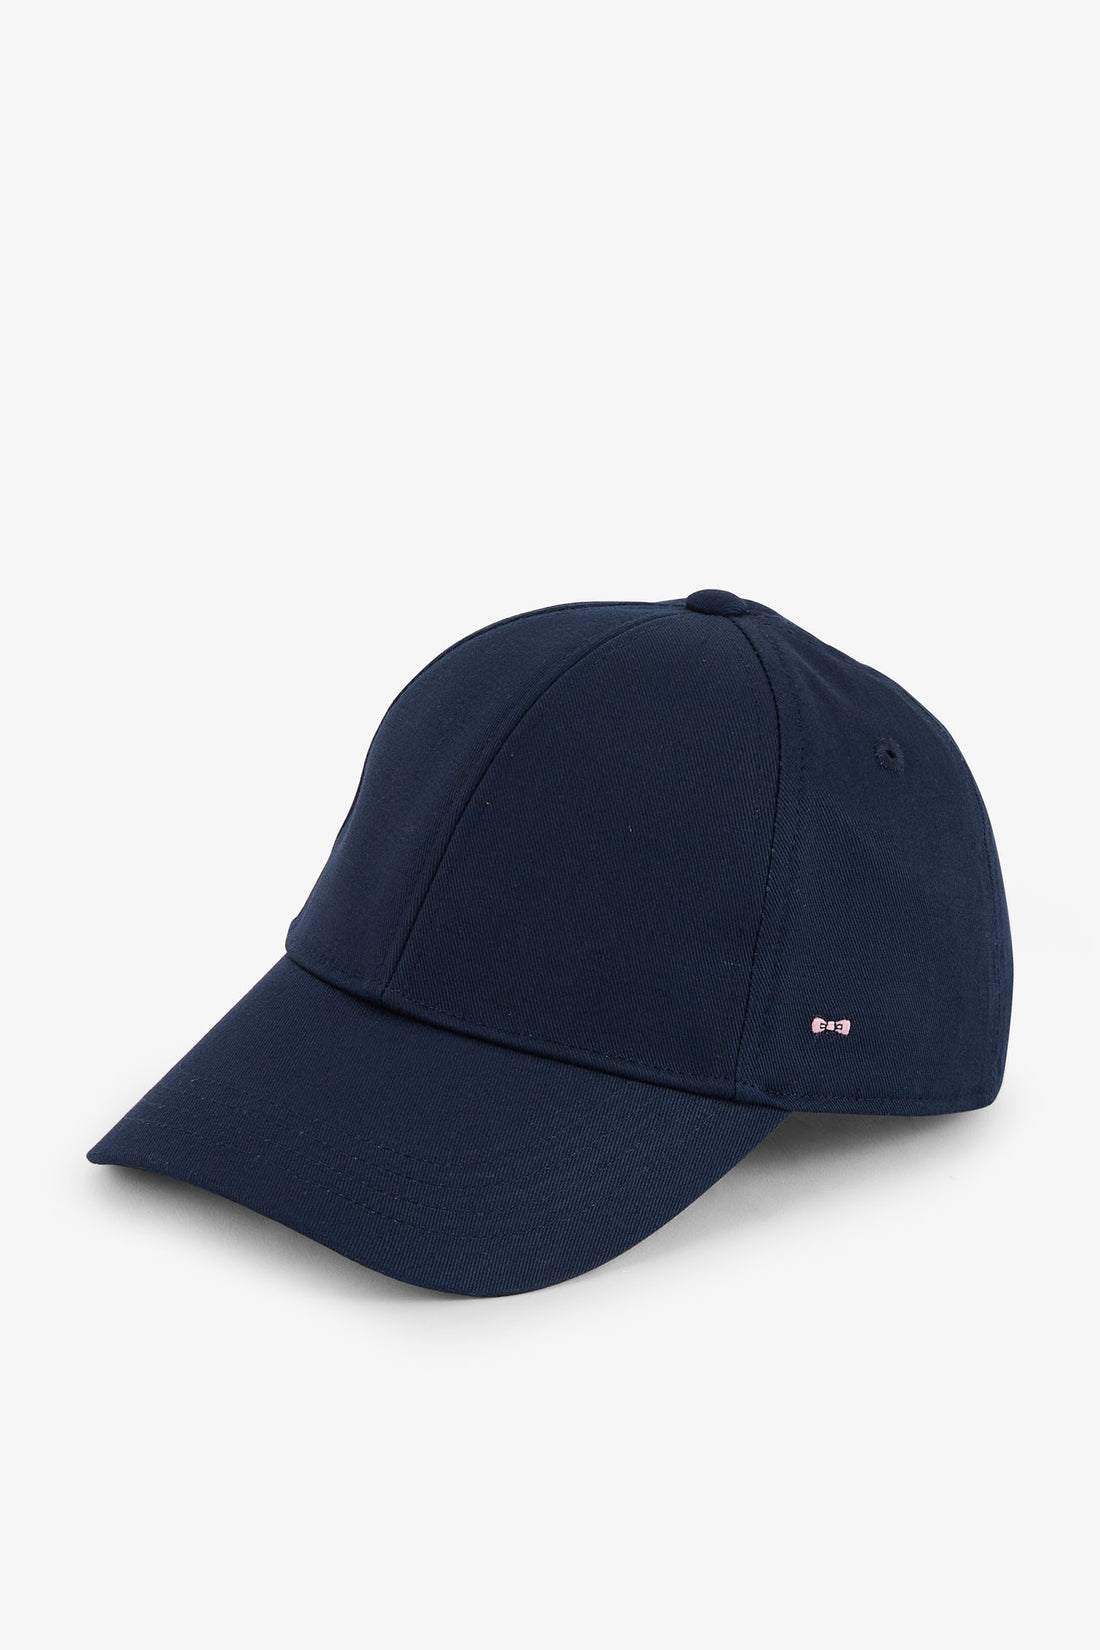 Navy Blue Cotton Canvas Cap With Bow Tie Embroidery_E24CHACA0001_BLF1_01